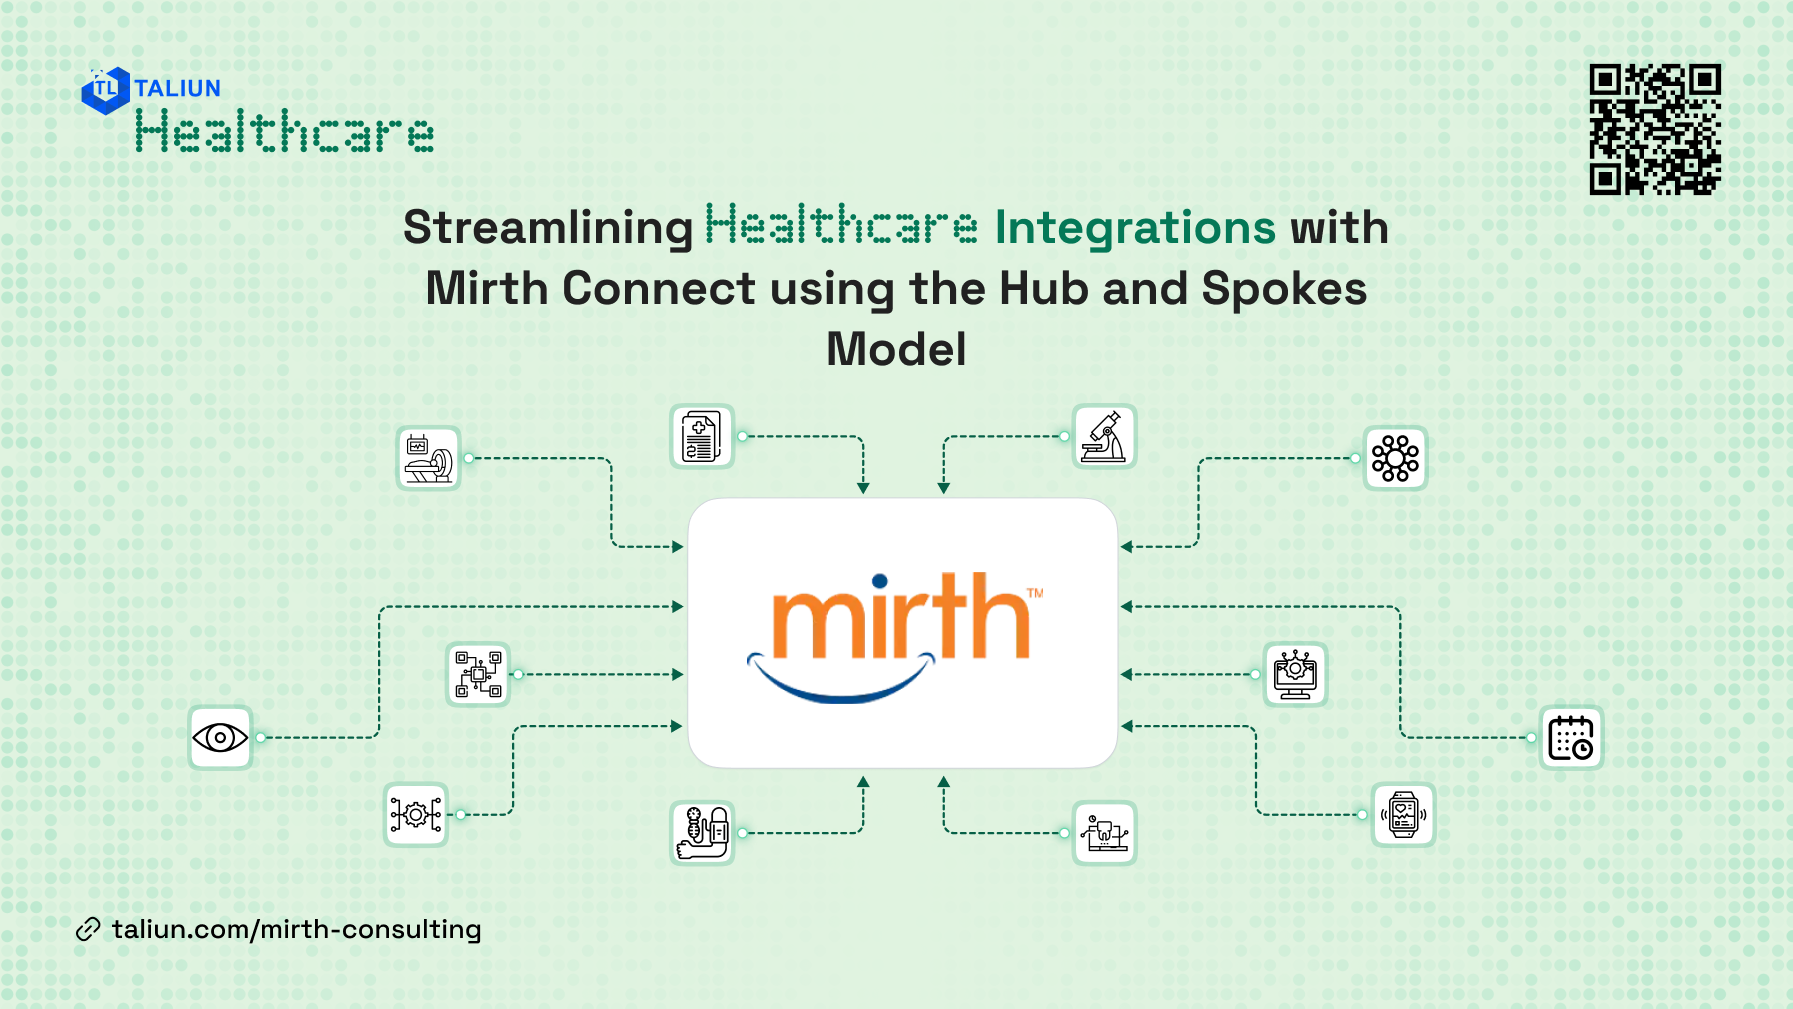 Healthcare Integrations with Mirth Connect | Mirth Consulting Services